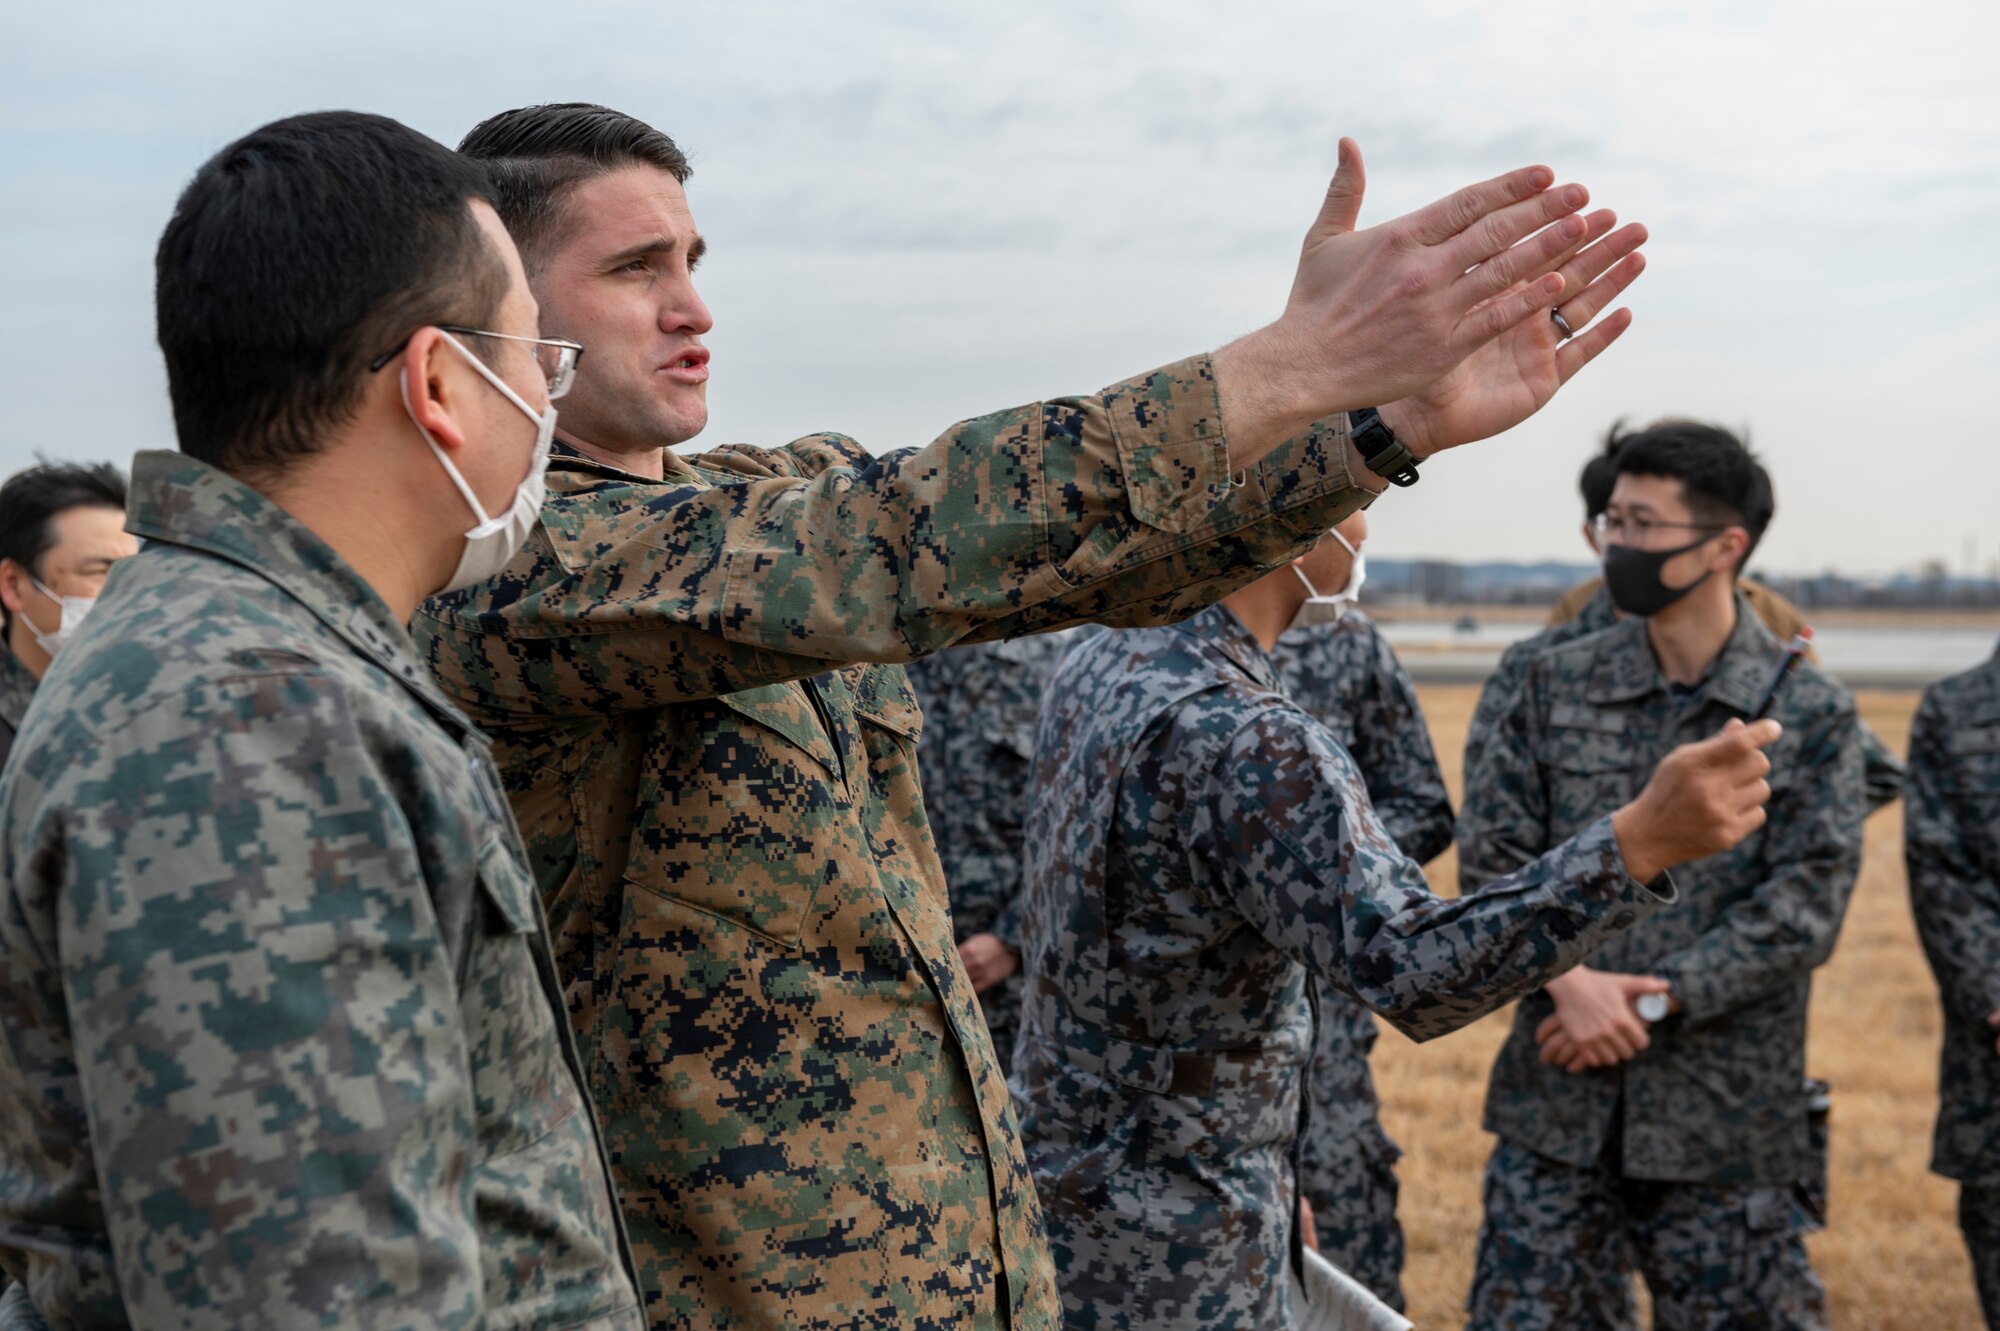 A U.S. marine gestures with both arms in front of him to a Japanese air force member